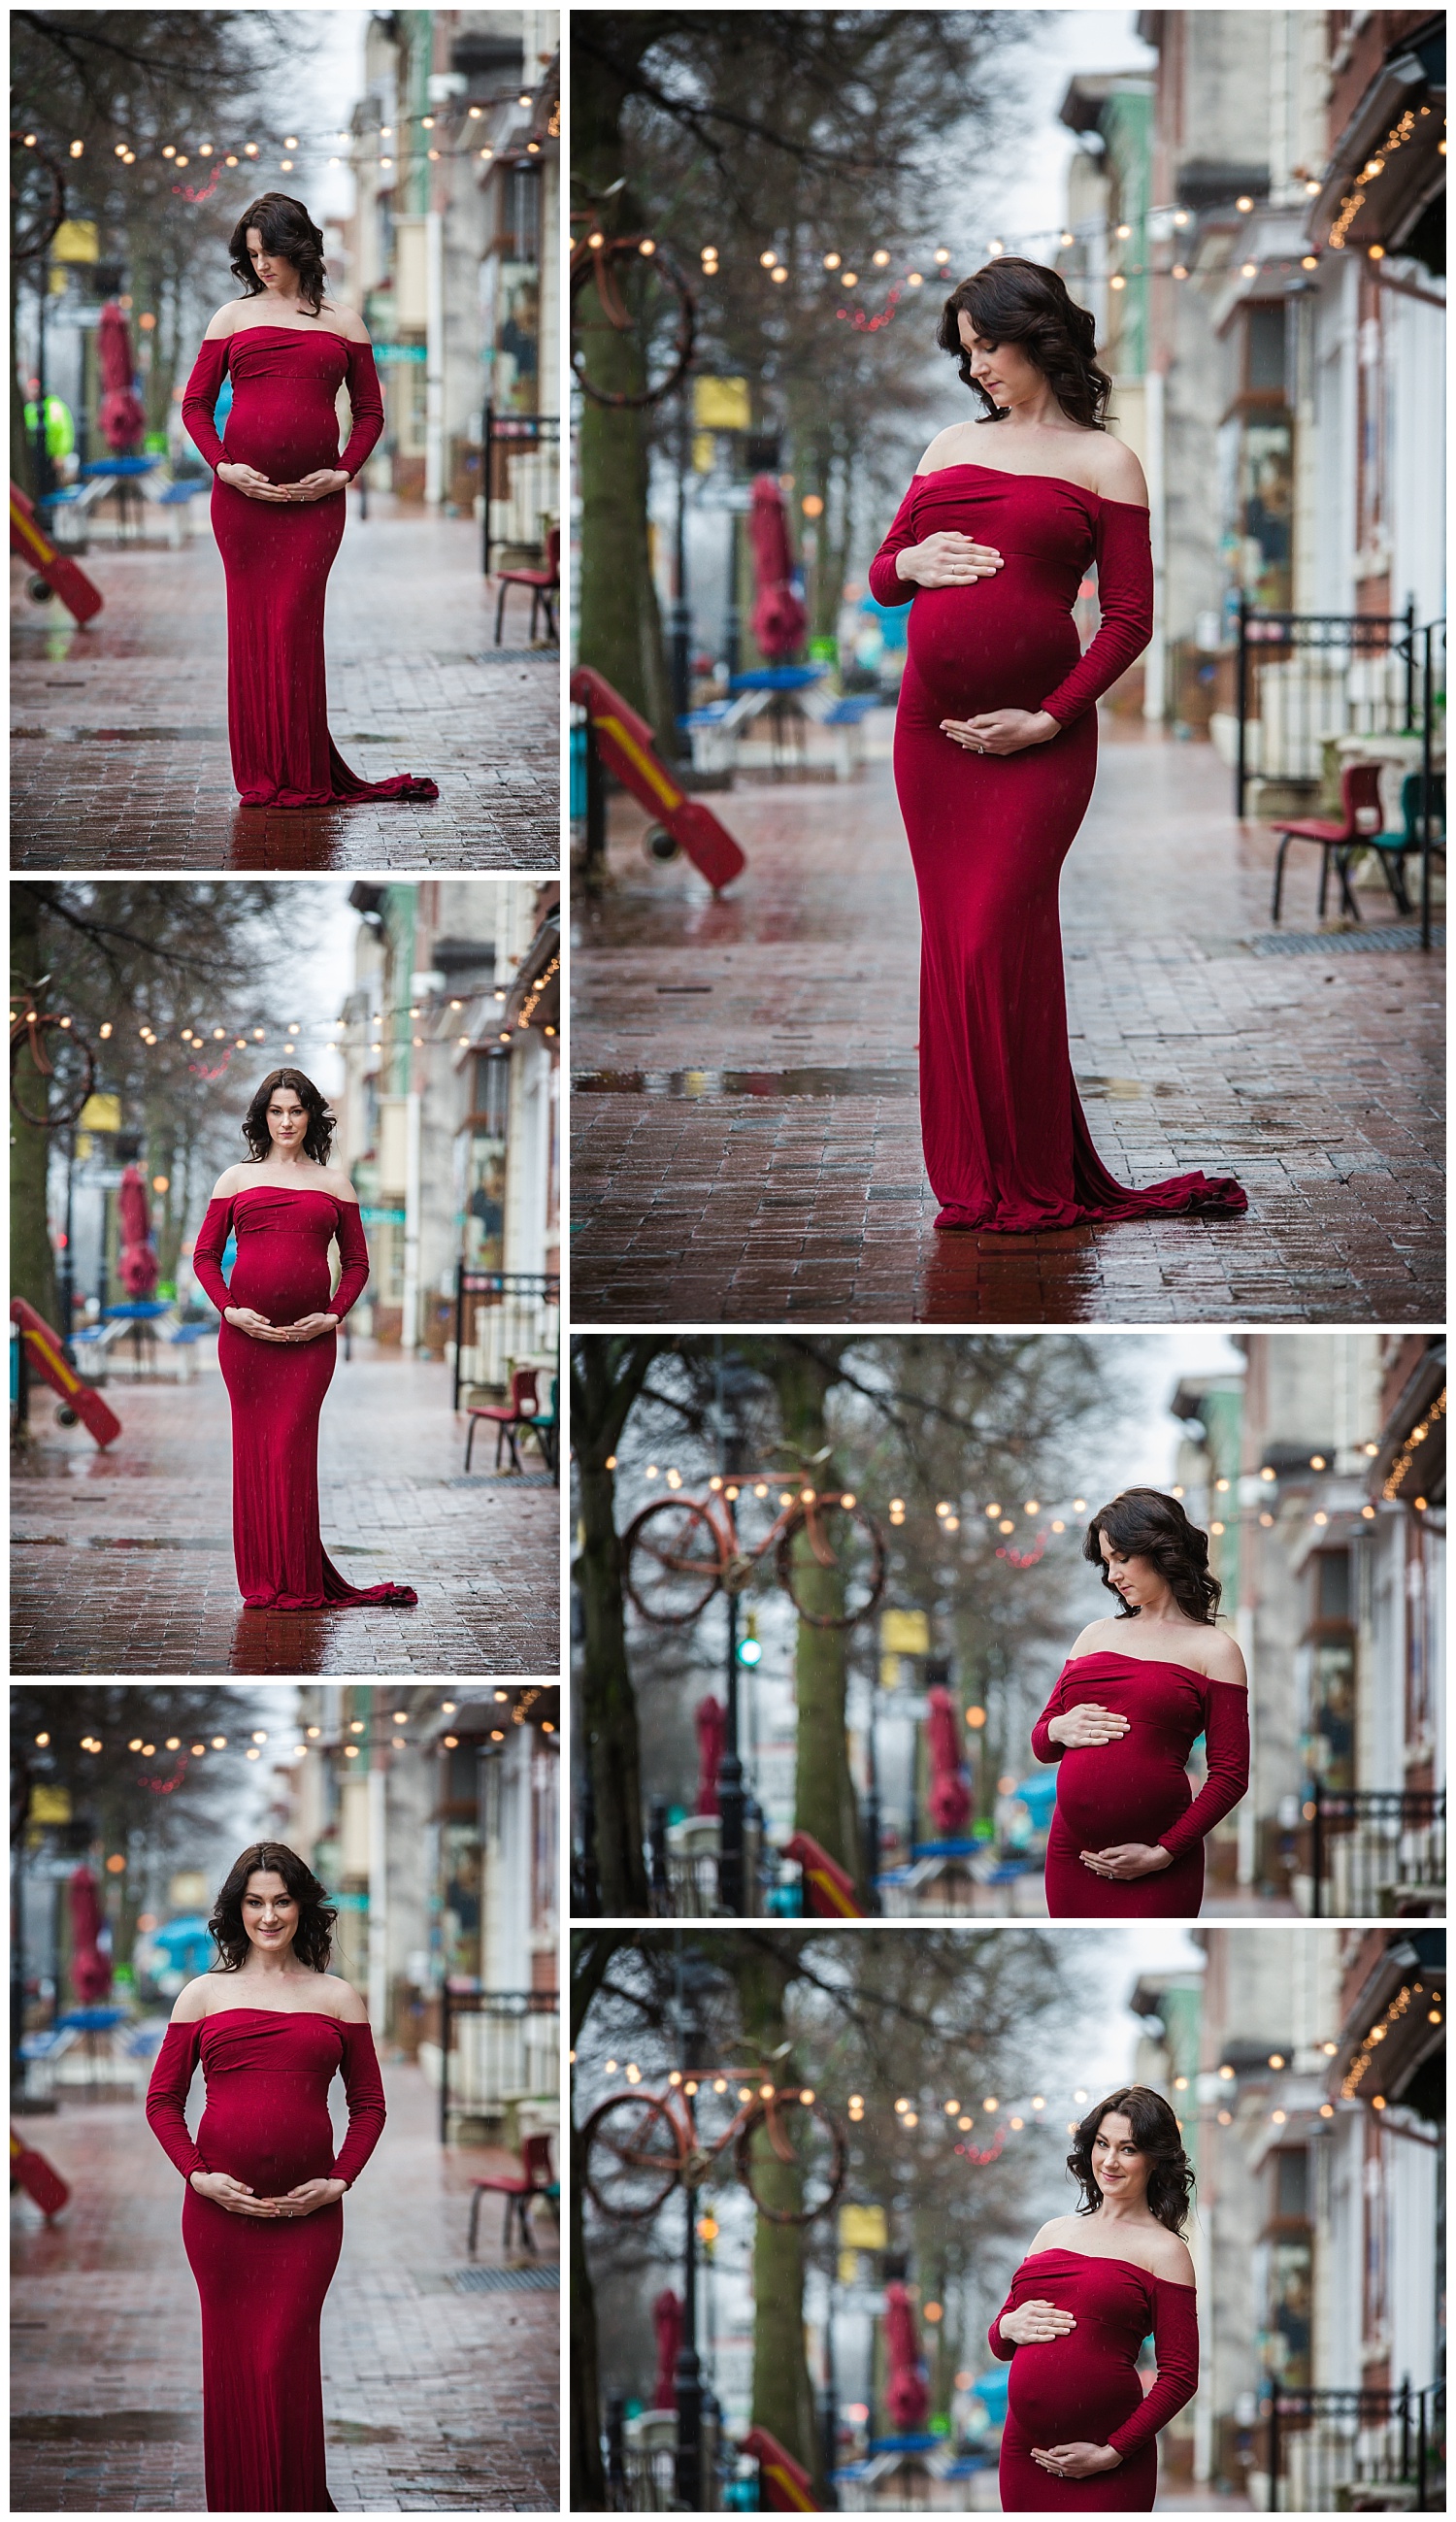 pregnancy photos in a red dress in burlington nj while raining